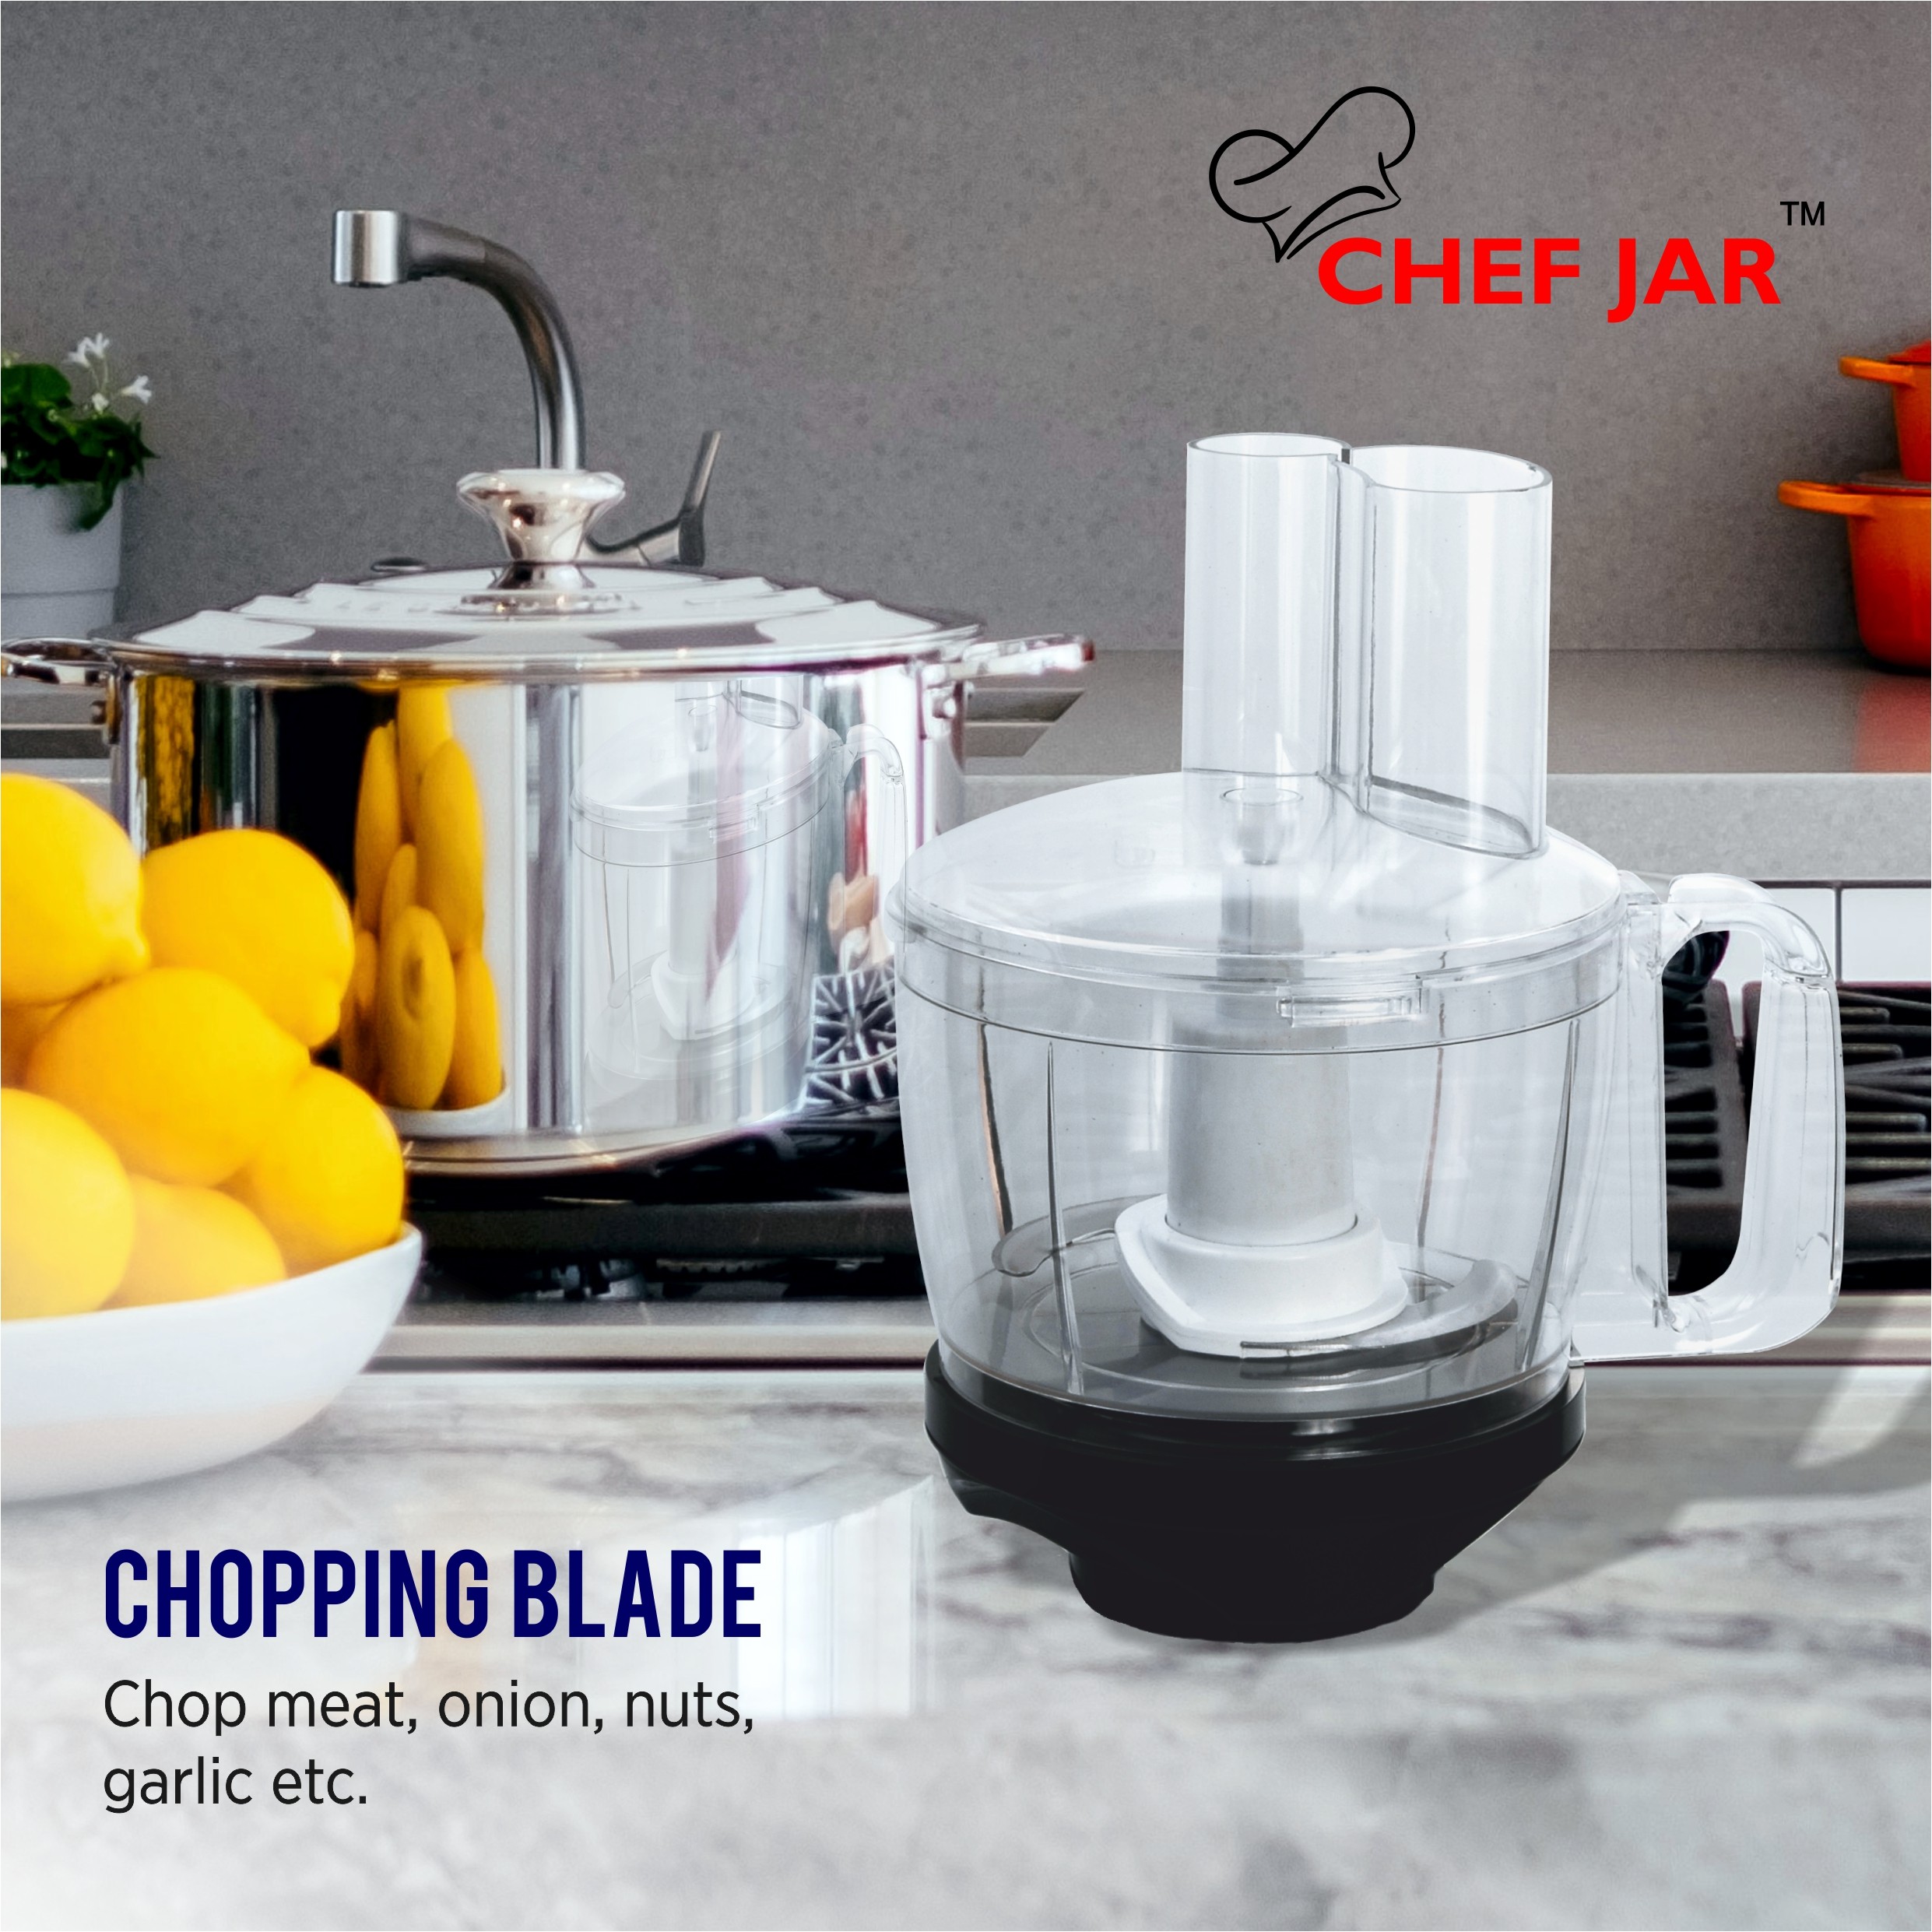 chef-jar-all-in-one-a-complete-food-processor-attachment-for-most-indian-mixer-grinders-compatible-with-all-preethi-premier-models-except-preethi-steele2